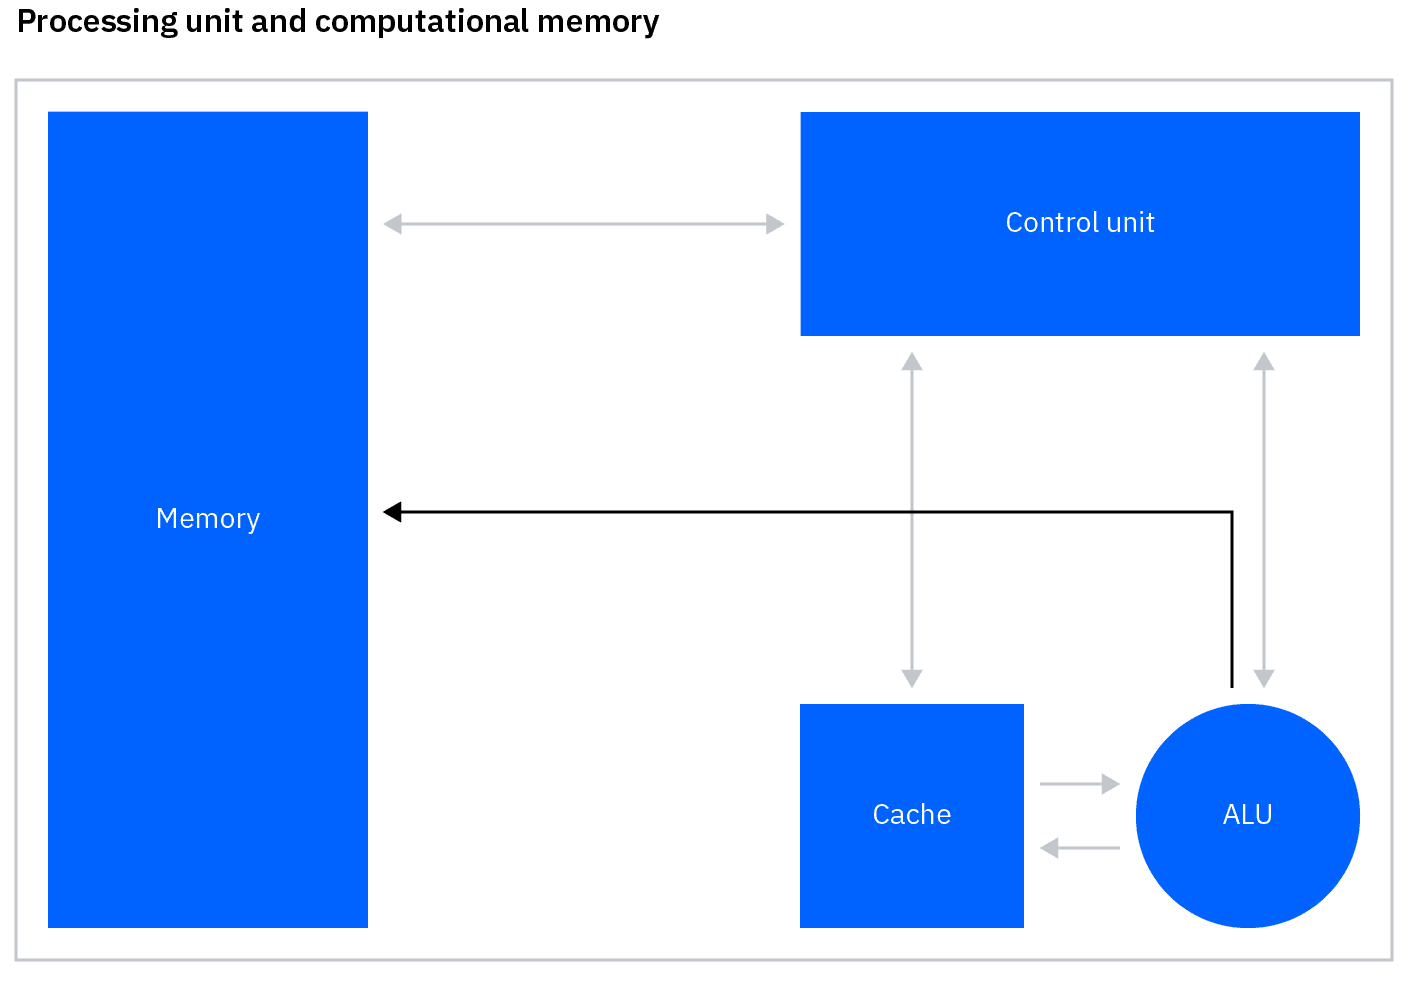 Graphical representation of a processing unit and computational memory